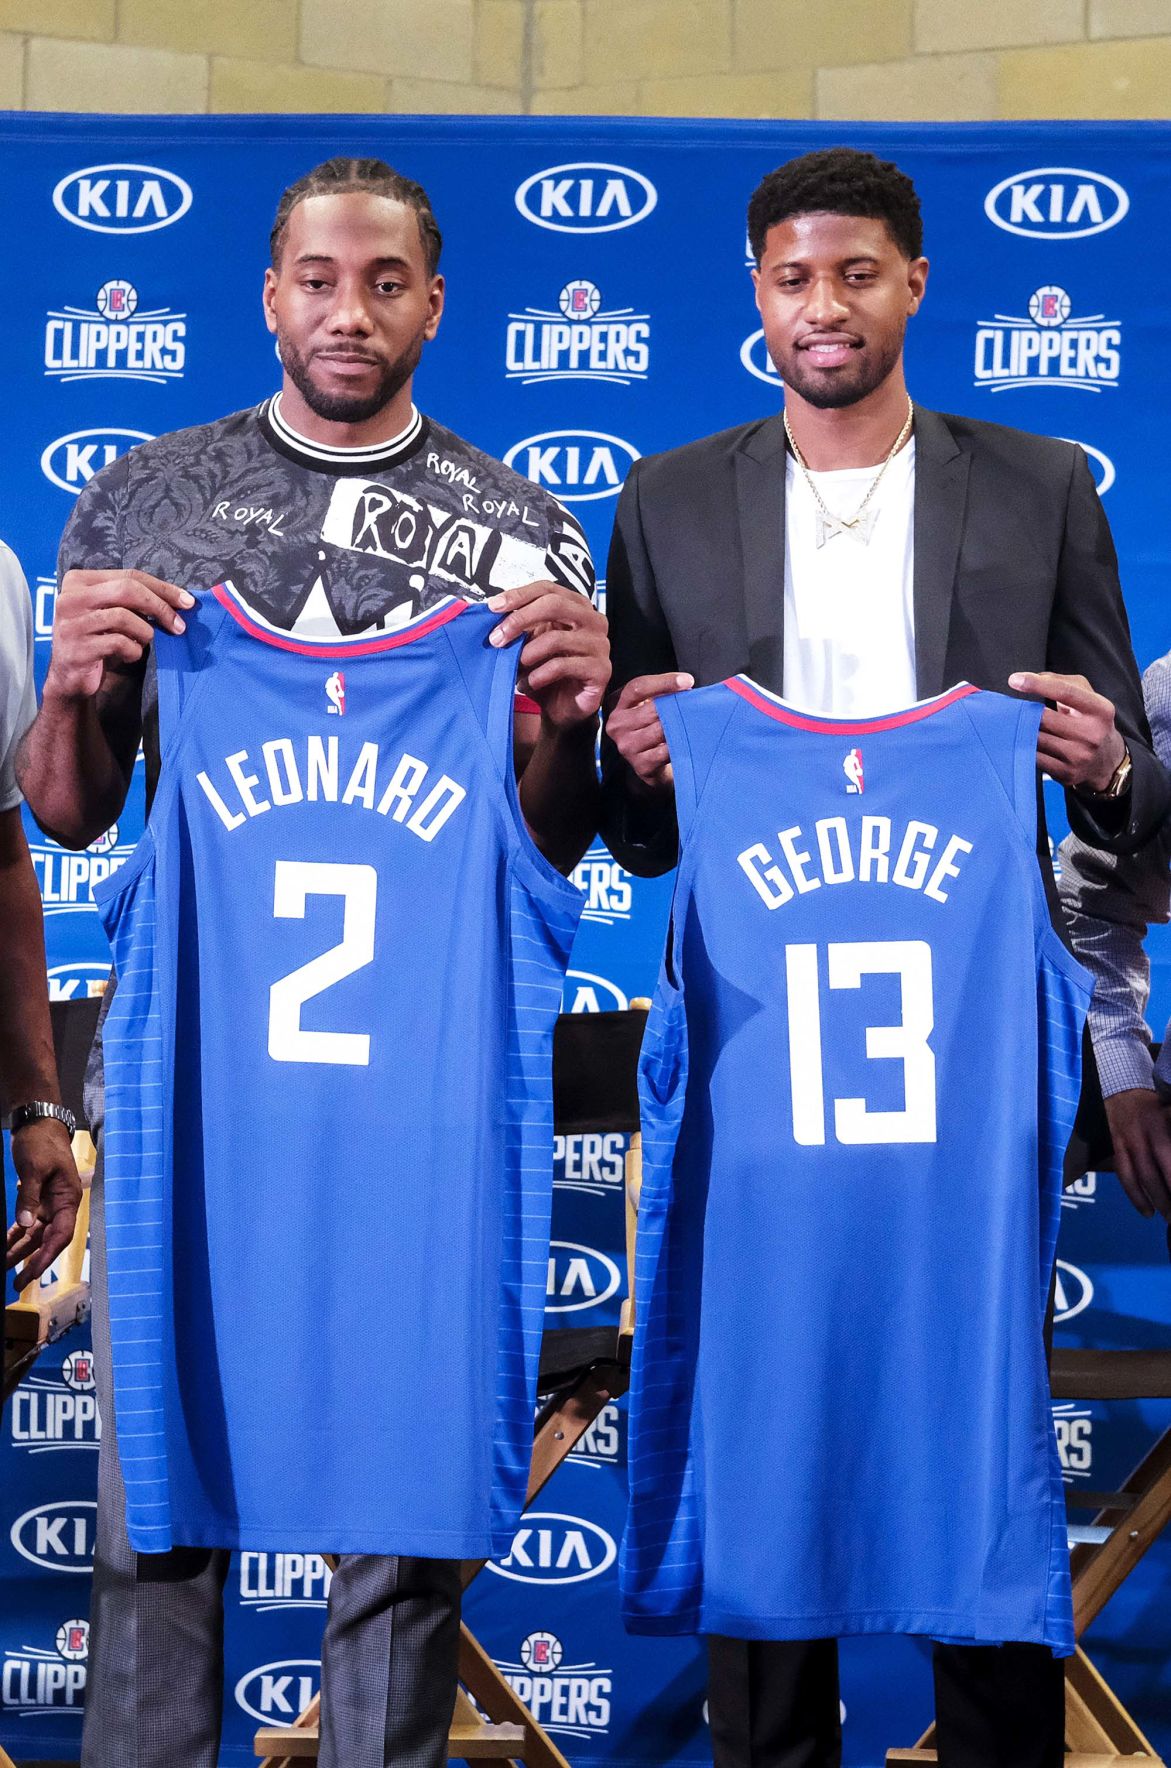 pg 13 clippers jersey